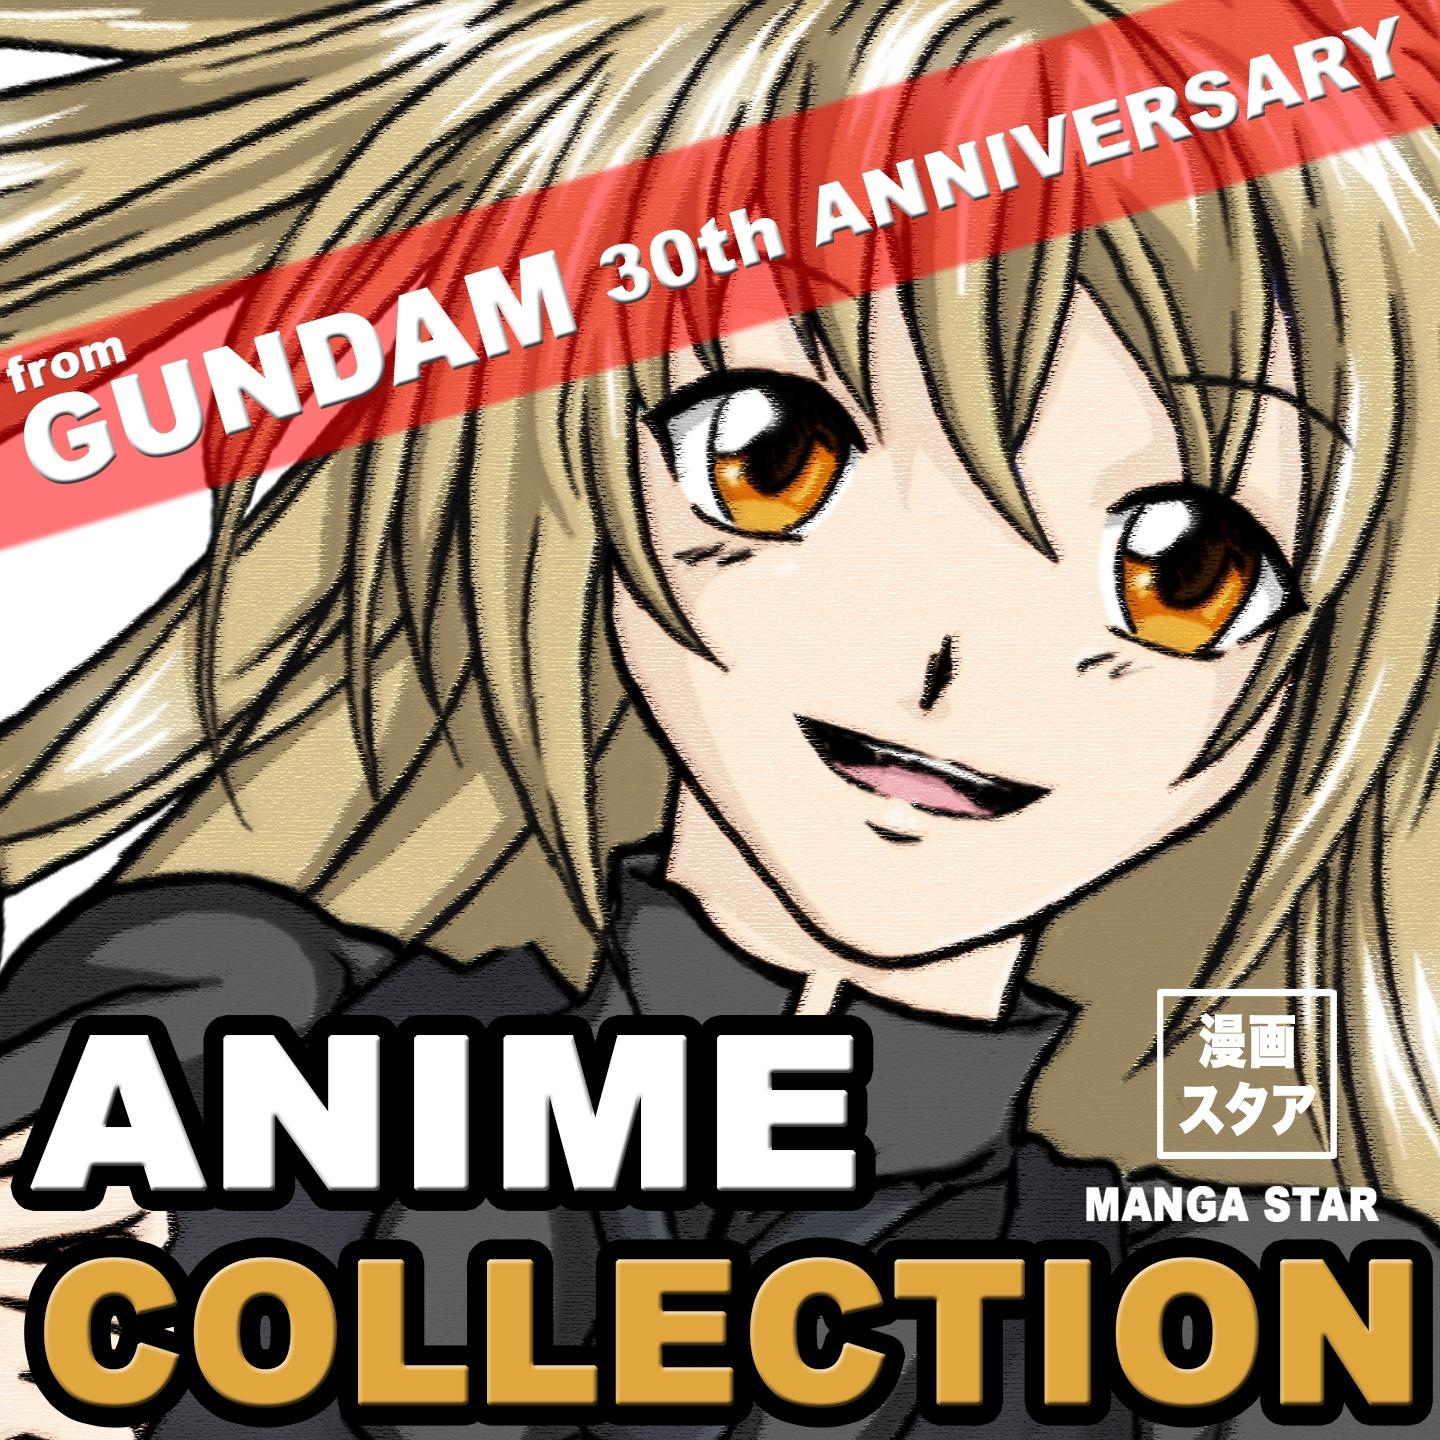 Anime Collection from Gundam 30th Anniversary